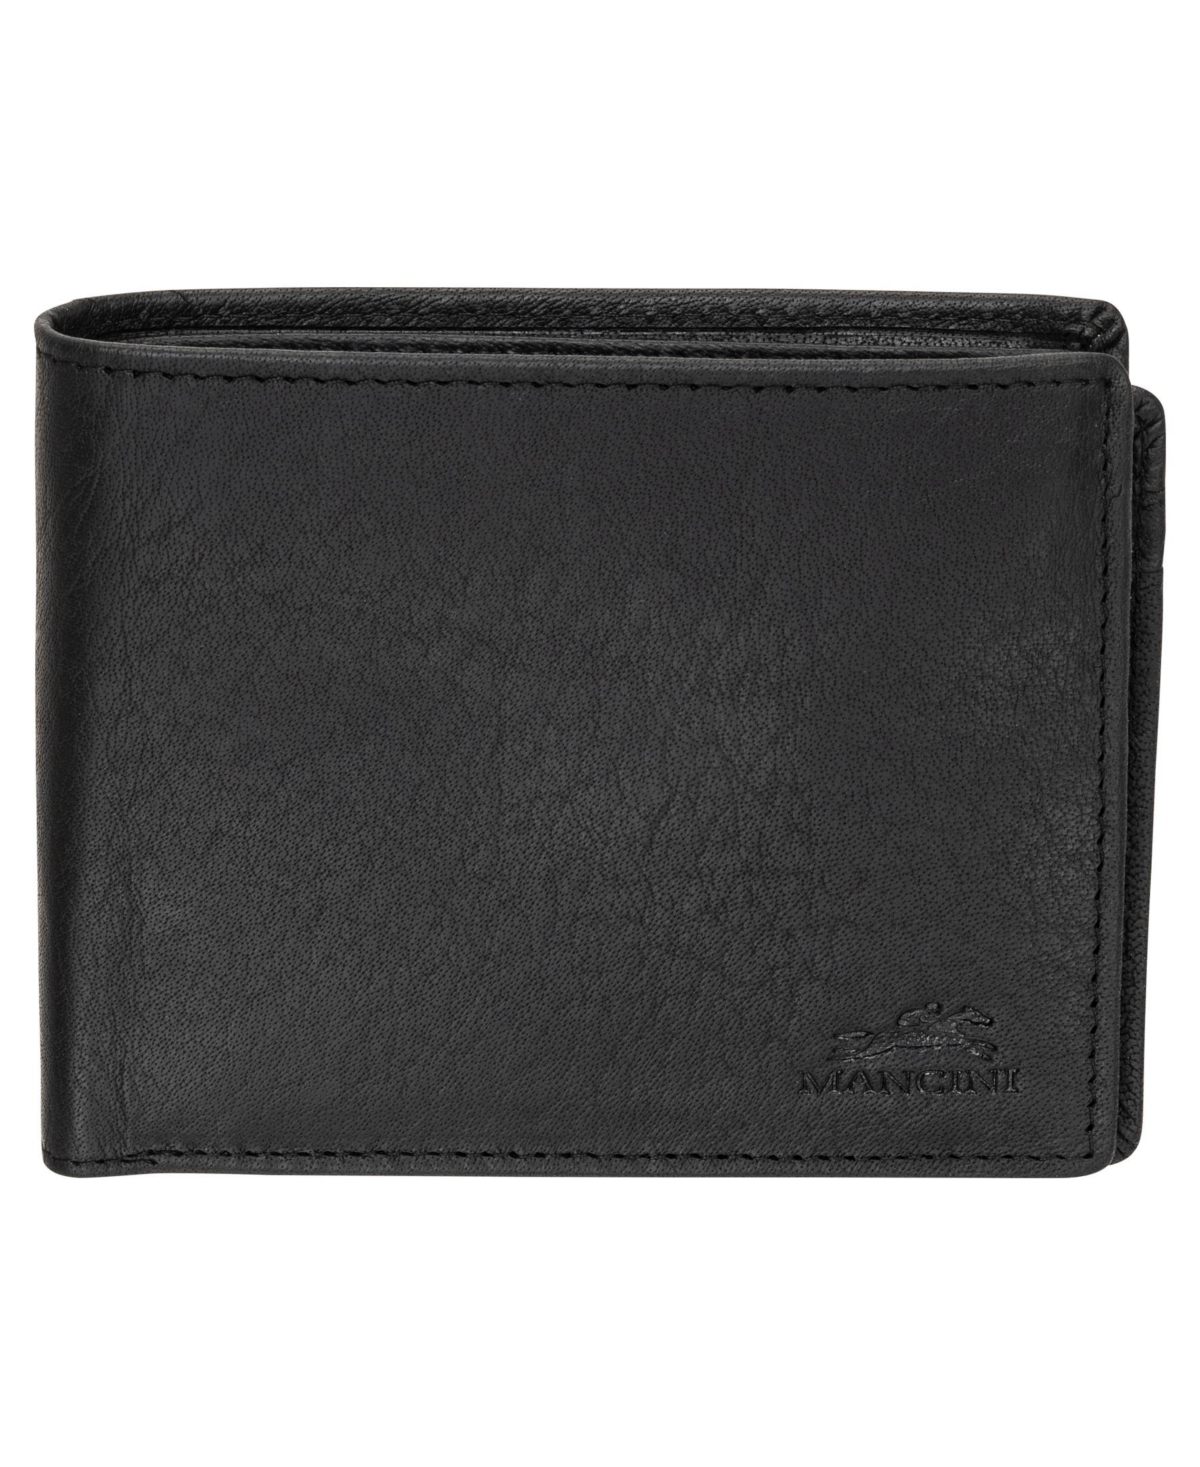 Men's Buffalo Rfid Secure Center Wing Wallet with Coin Pocket - Black